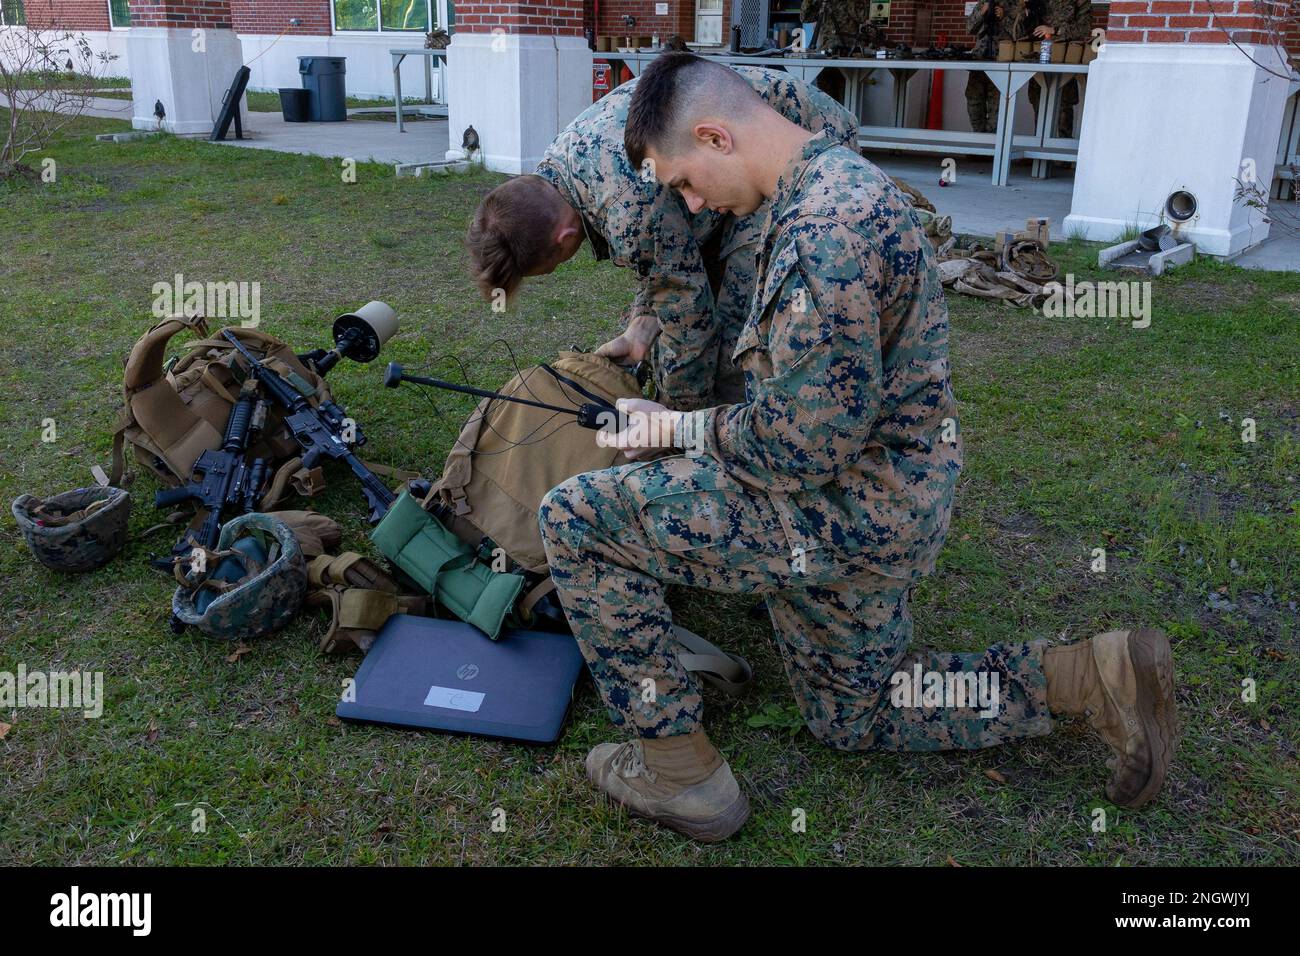 A U.S Marine with the 26th Marine Expeditionary Unit (MEU), inspects gear during Intelligence Interoperability (Intel Interop) at Stone Bay, North Carolina, Nov. 30, 2022. The 26th MEU participated in Intel Interop to enhance understanding of multi-disciplinary intelligence functions across the Marine Air-Ground Task Force. Intel Interop is part of the larger MAGTF Interoperability course, an intermediate-level pre-deployment training program event, facilitated by Expeditionary Operations Training Group. Stock Photo